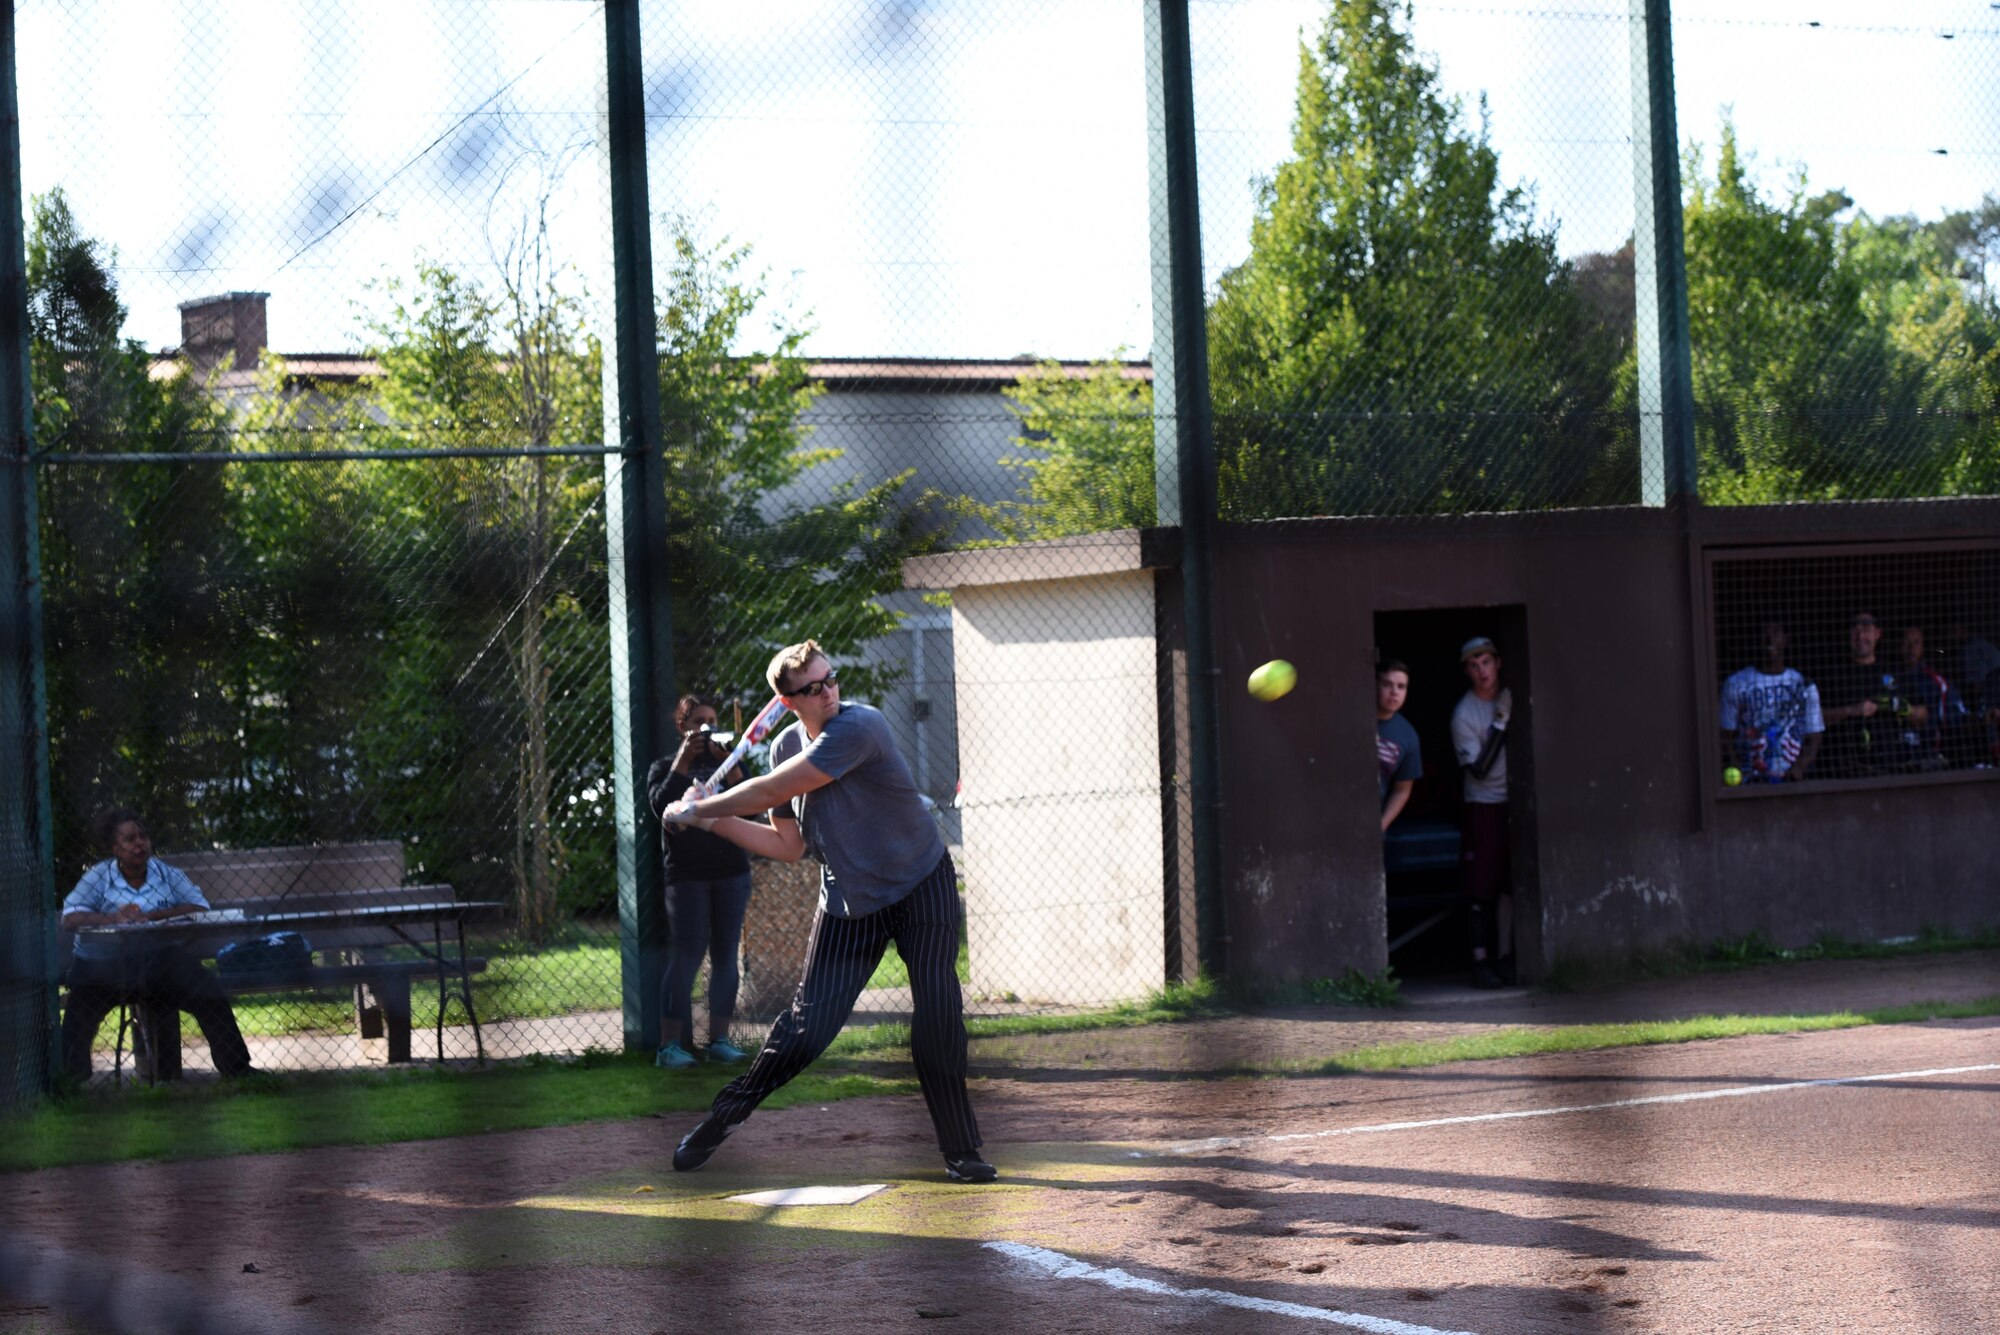 U.S. Air Force Staff Sgt. Theron Green, 86th Maintenance Squadron job title, swings at a softball during an intramural soft ball game on Ramstein Air Base, Germany, Aug. 22, 2017. The intramural softball games boost morale amongst Airmen at Ramstein. (U.S. Air Force photo/Airman 1st Class Milton Jr. Hamilton)